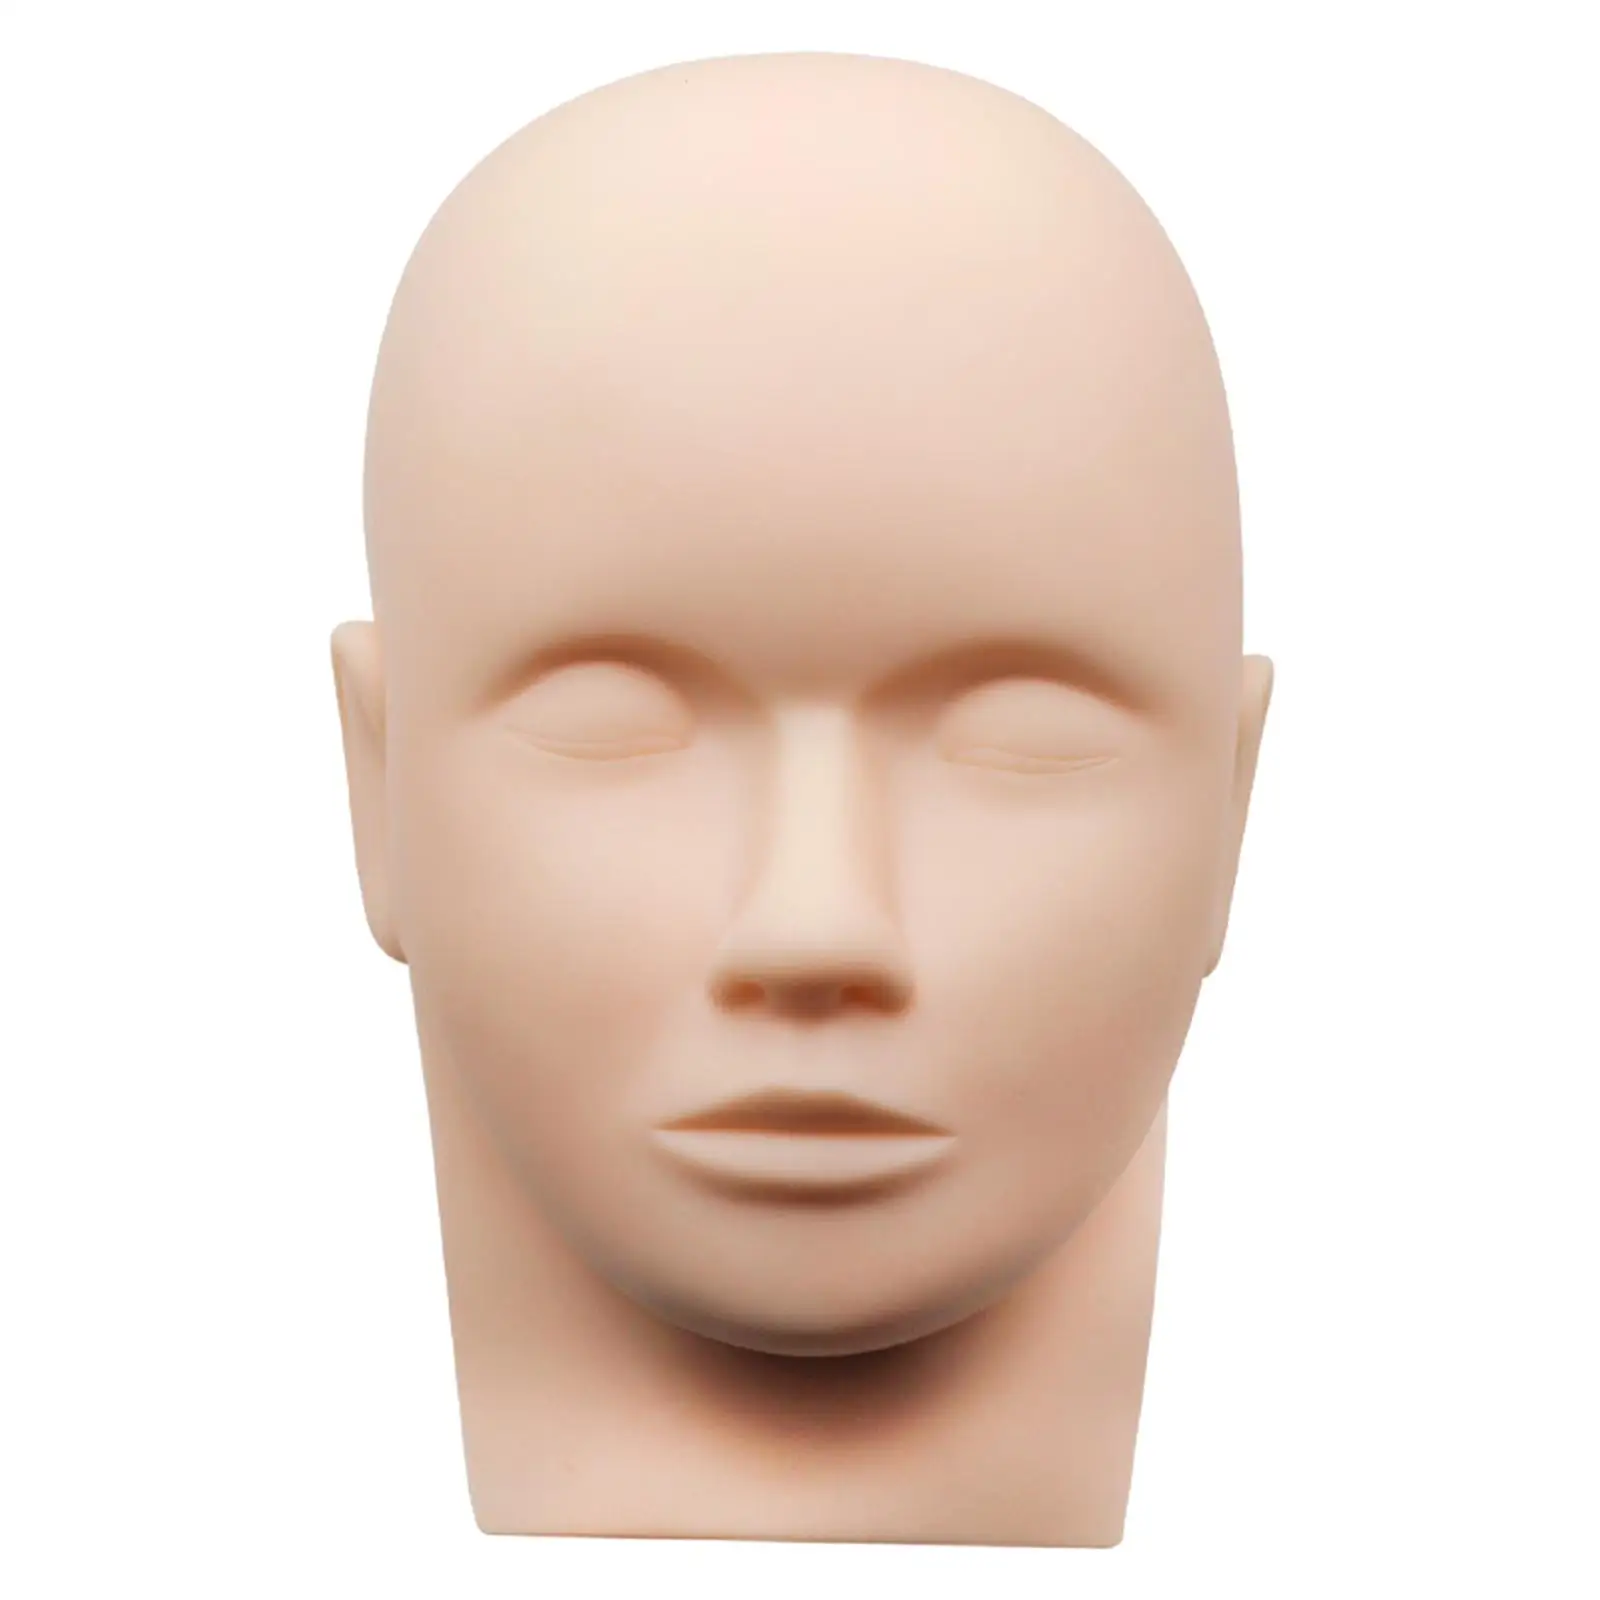 Eyelash Silicone Head Mold Soft Touch Training Mannequin Head Lash Extension Supplies Mannequin Cosmetology Practice